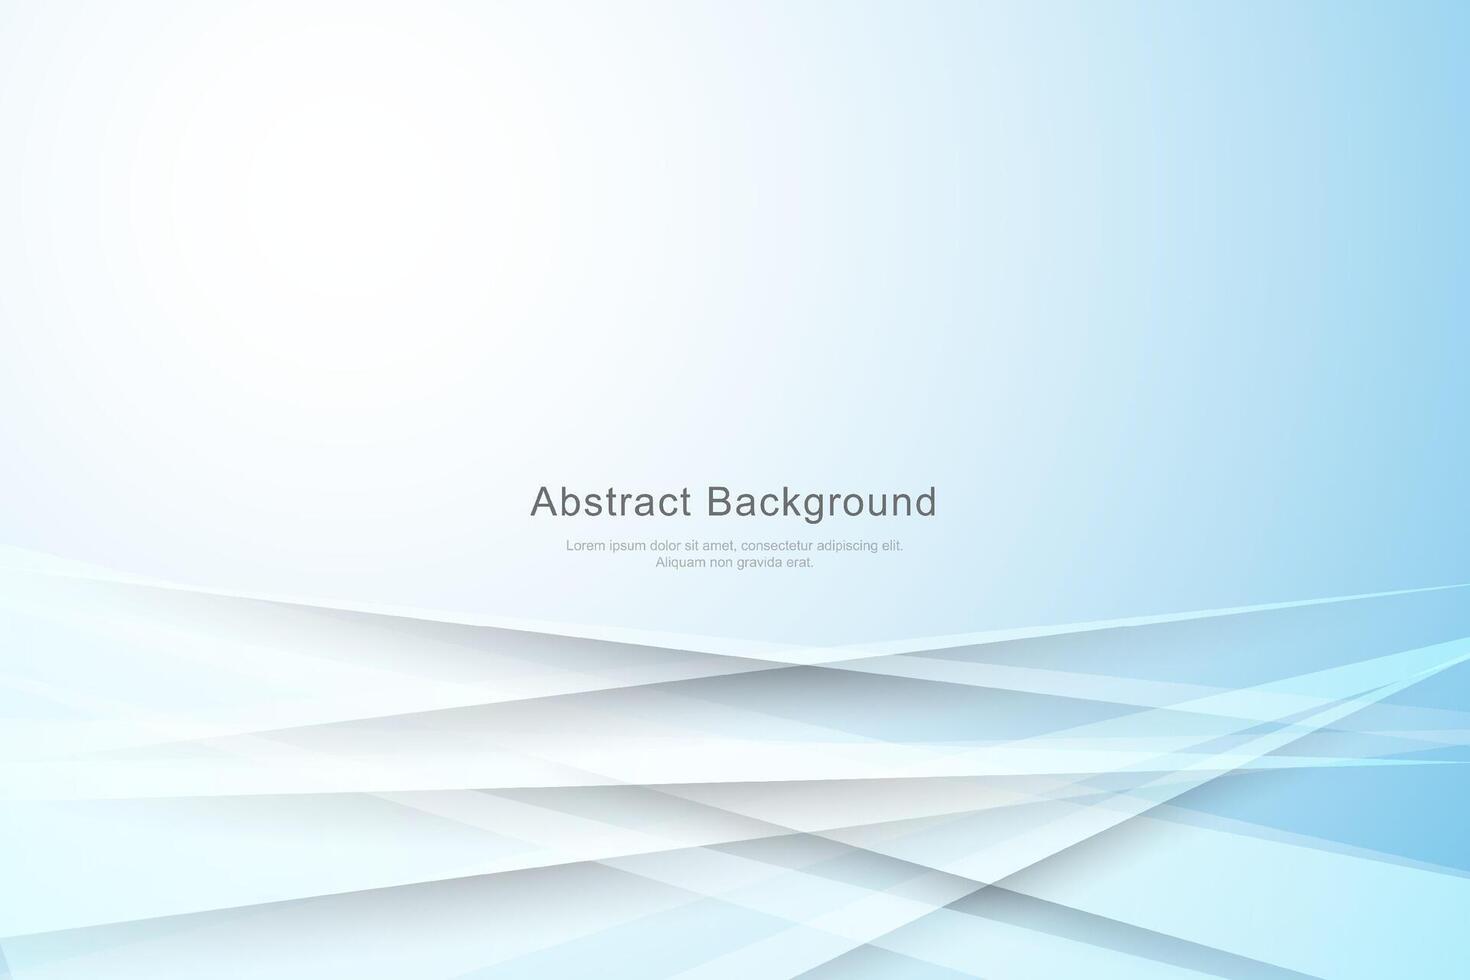 Abstract background with modern design vector